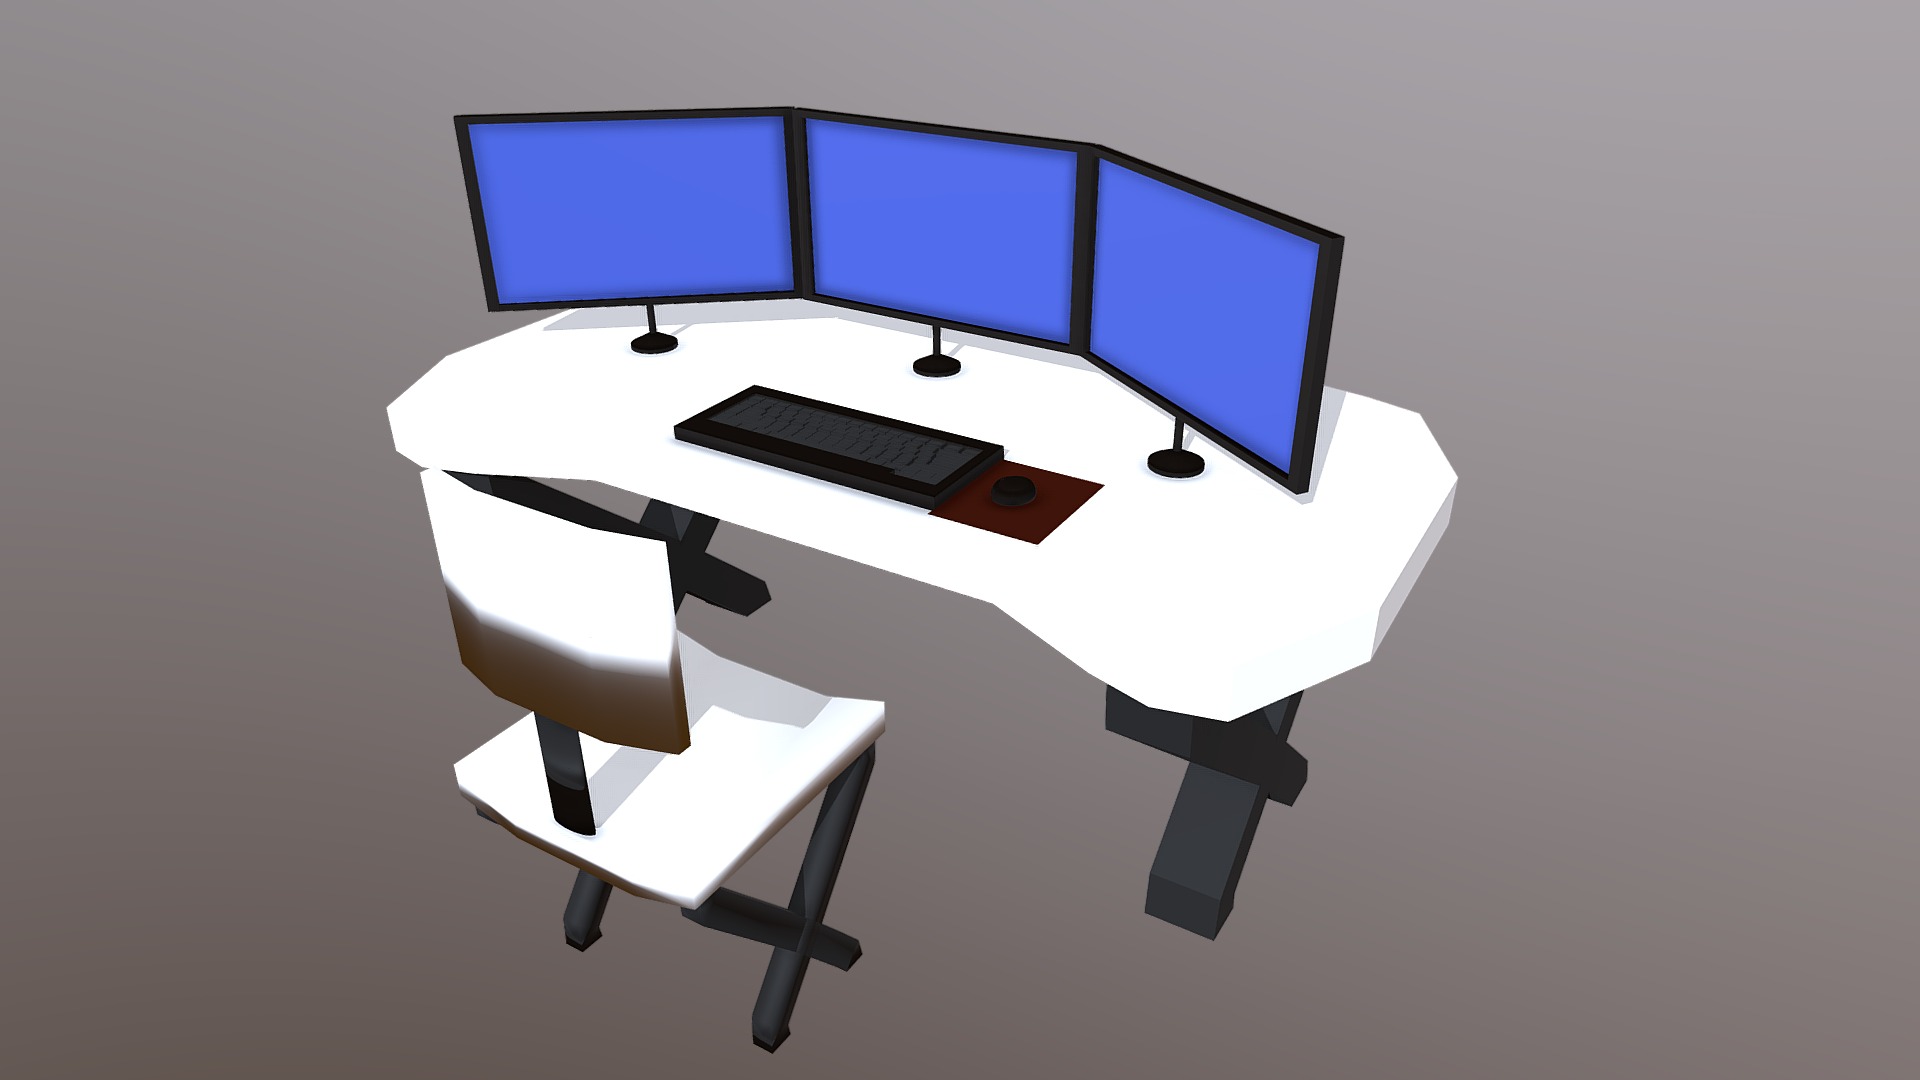 3D model Developer- Workstation 1 - This is a 3D model of the Developer- Workstation 1. The 3D model is about a desk with a computer and chairs.